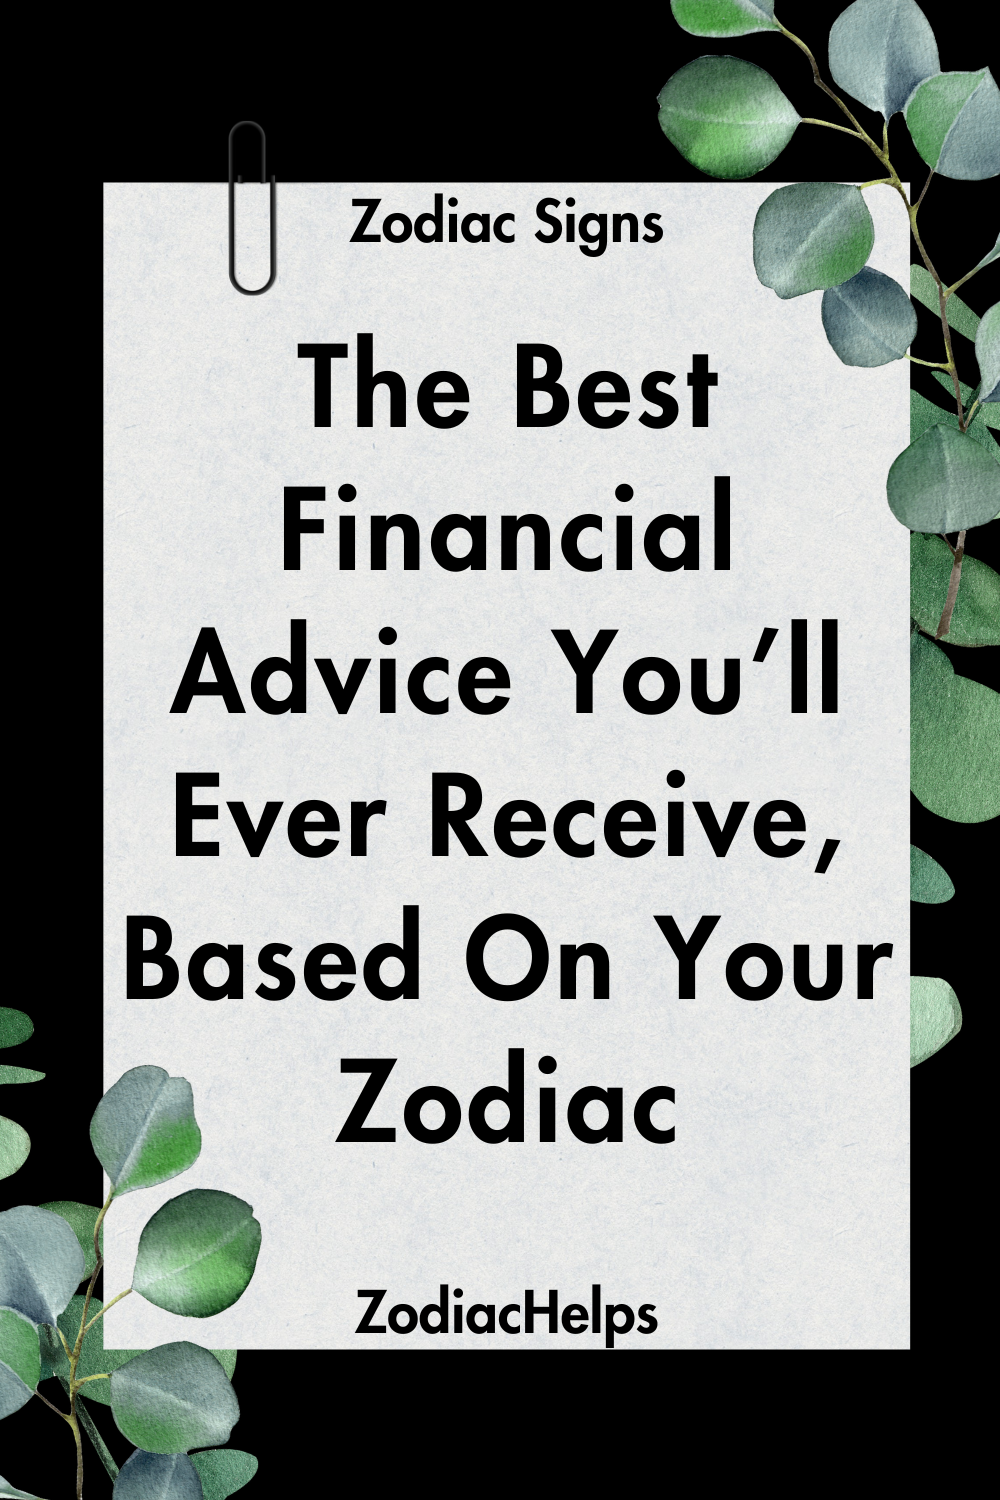 The Best Financial Advice You’ll Ever Receive, Based On Your Zodiac